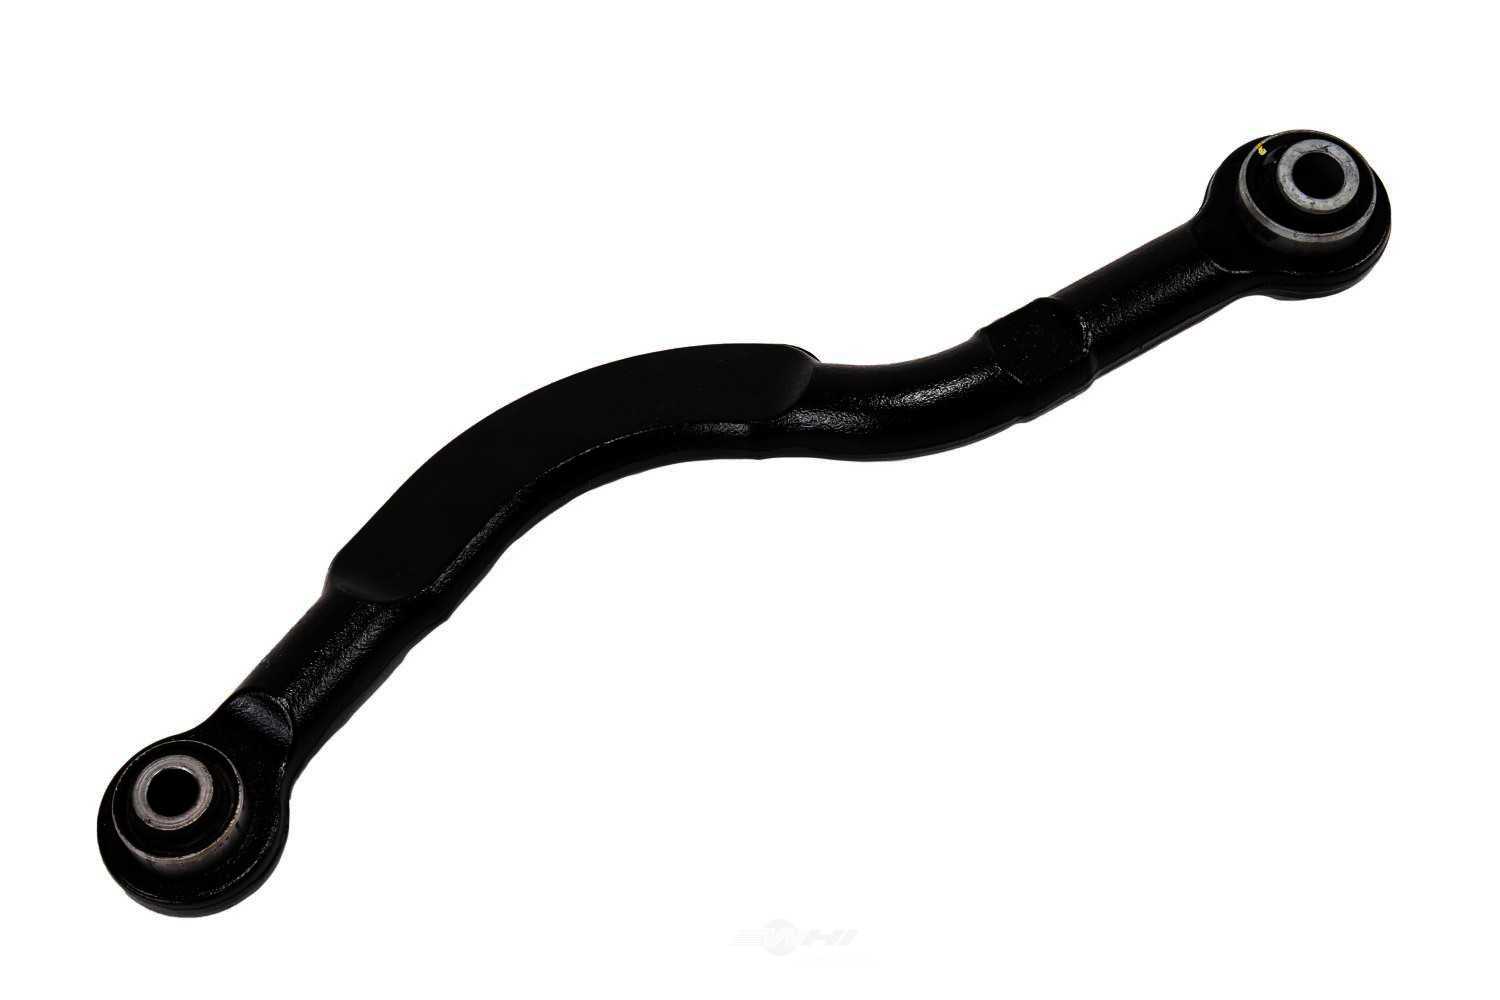 GM GENUINE PARTS CANADA - Lateral Arm - GMC 23484167